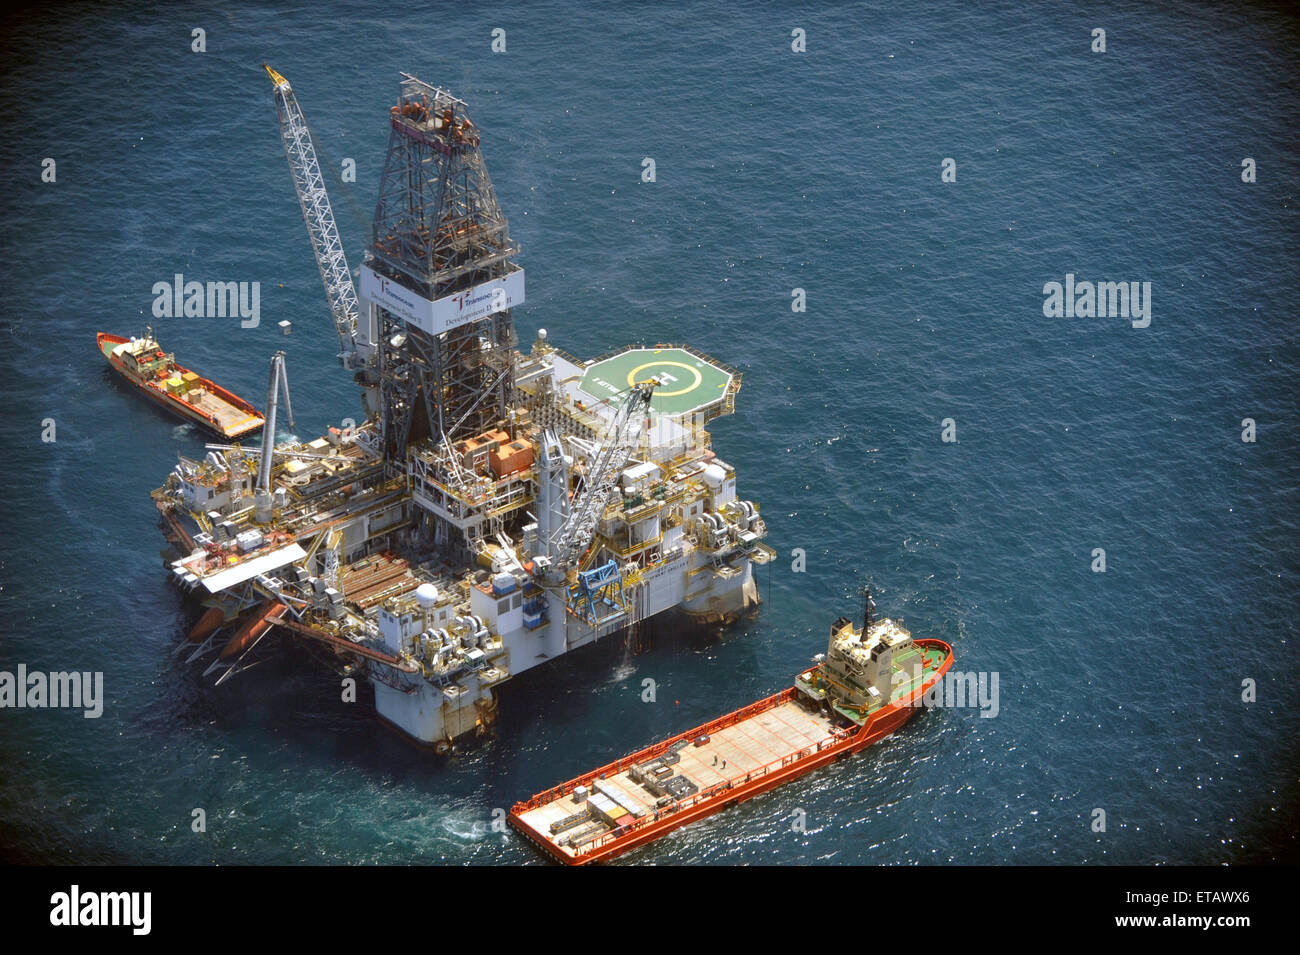 The mobile offshore drilling unit Development Driller II in the process of drilling a relief well at the BP Deepwater Horizon oil spill disaster site June 12, 2010 in the Gulf of Mexico. Stock Photo